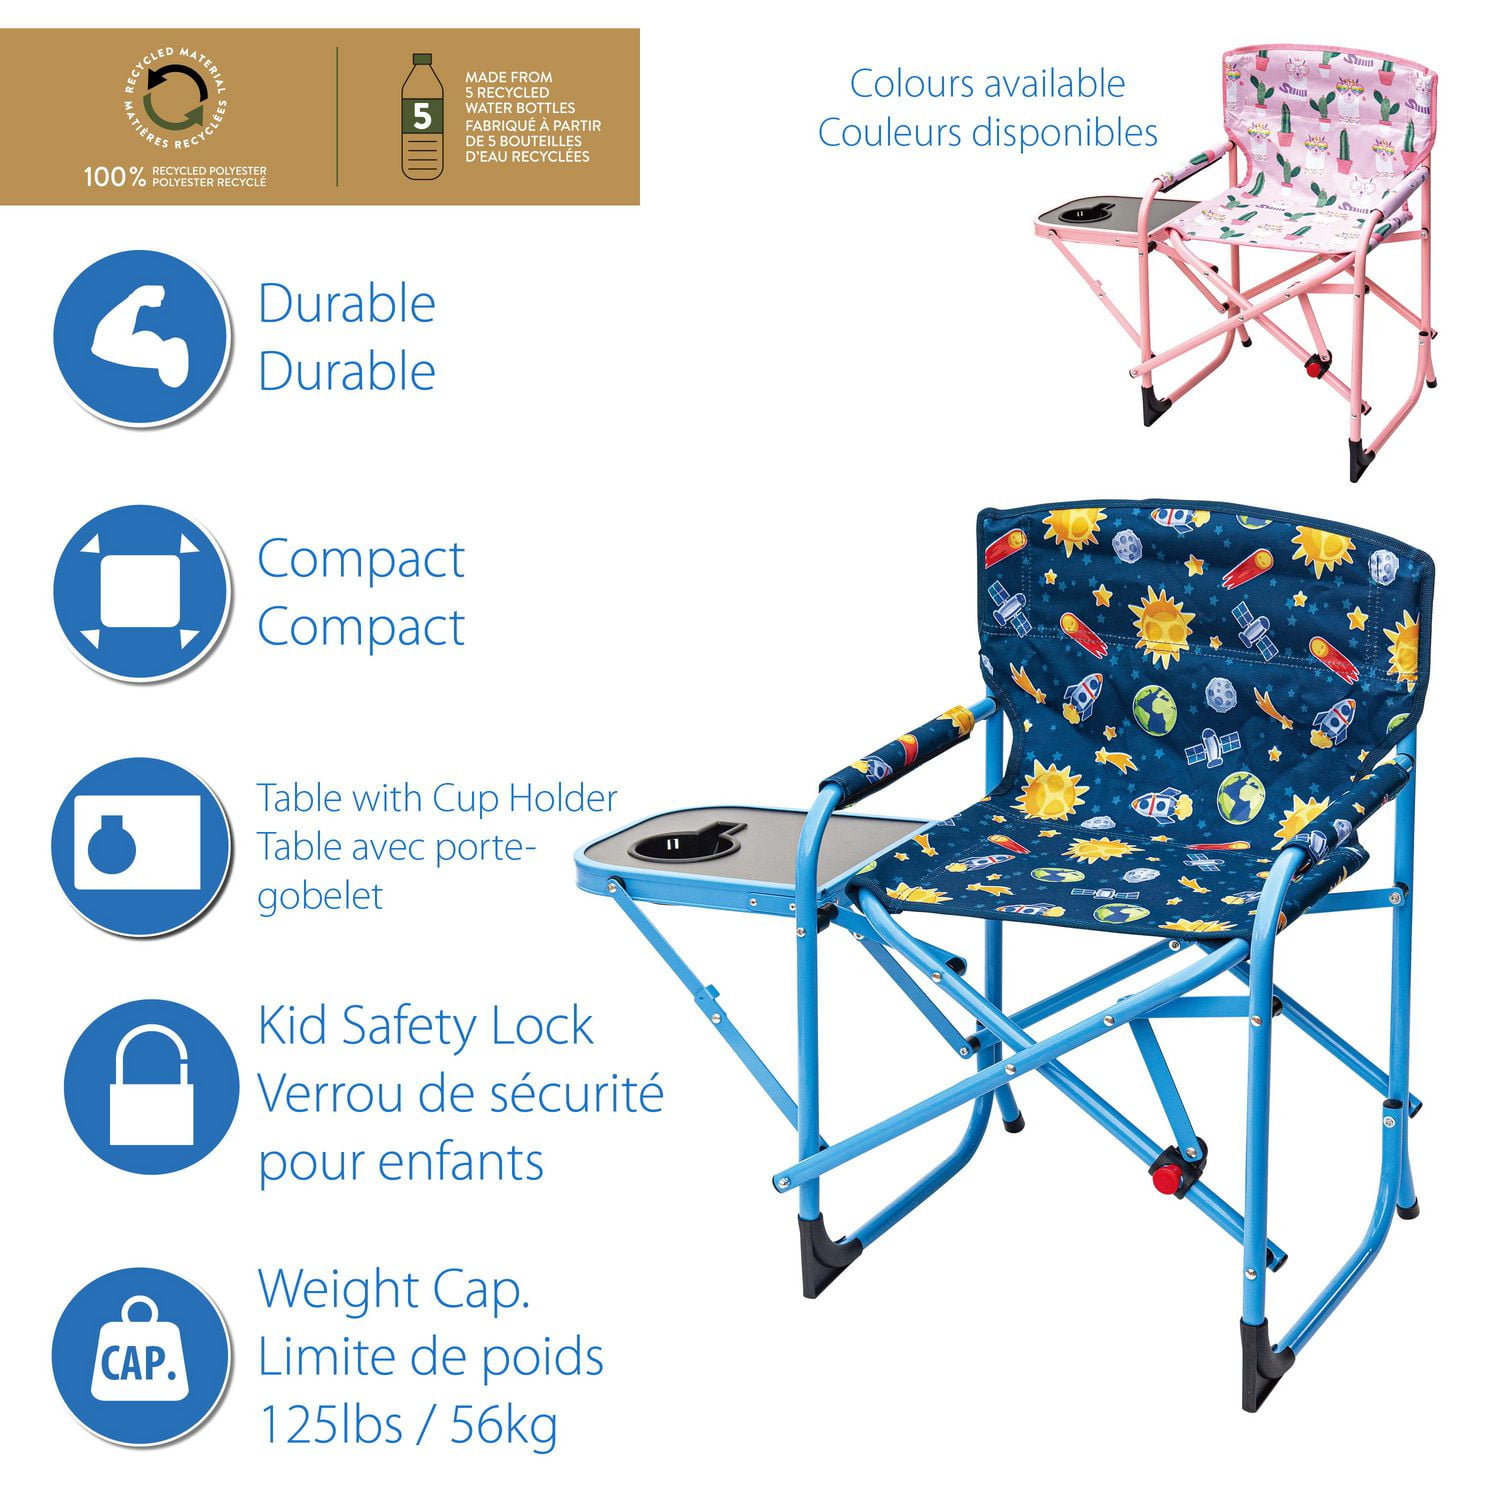 Ozark Trail Kids' Director Chair with Side Table 